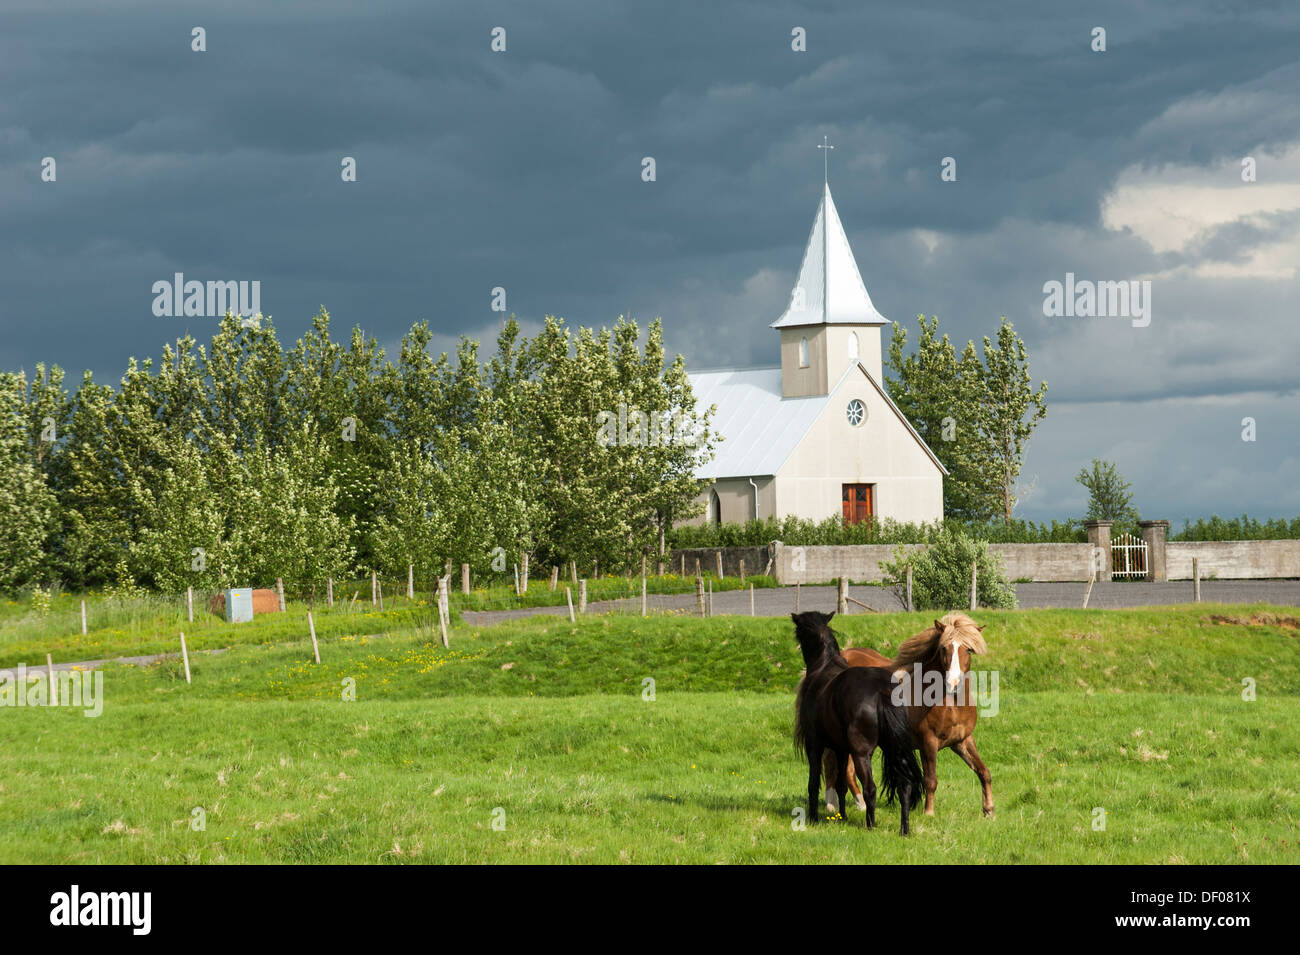 Icelandic horses or ponies, in front of a church, Suðurland, South Iceland, Iceland, Europe Stock Photo